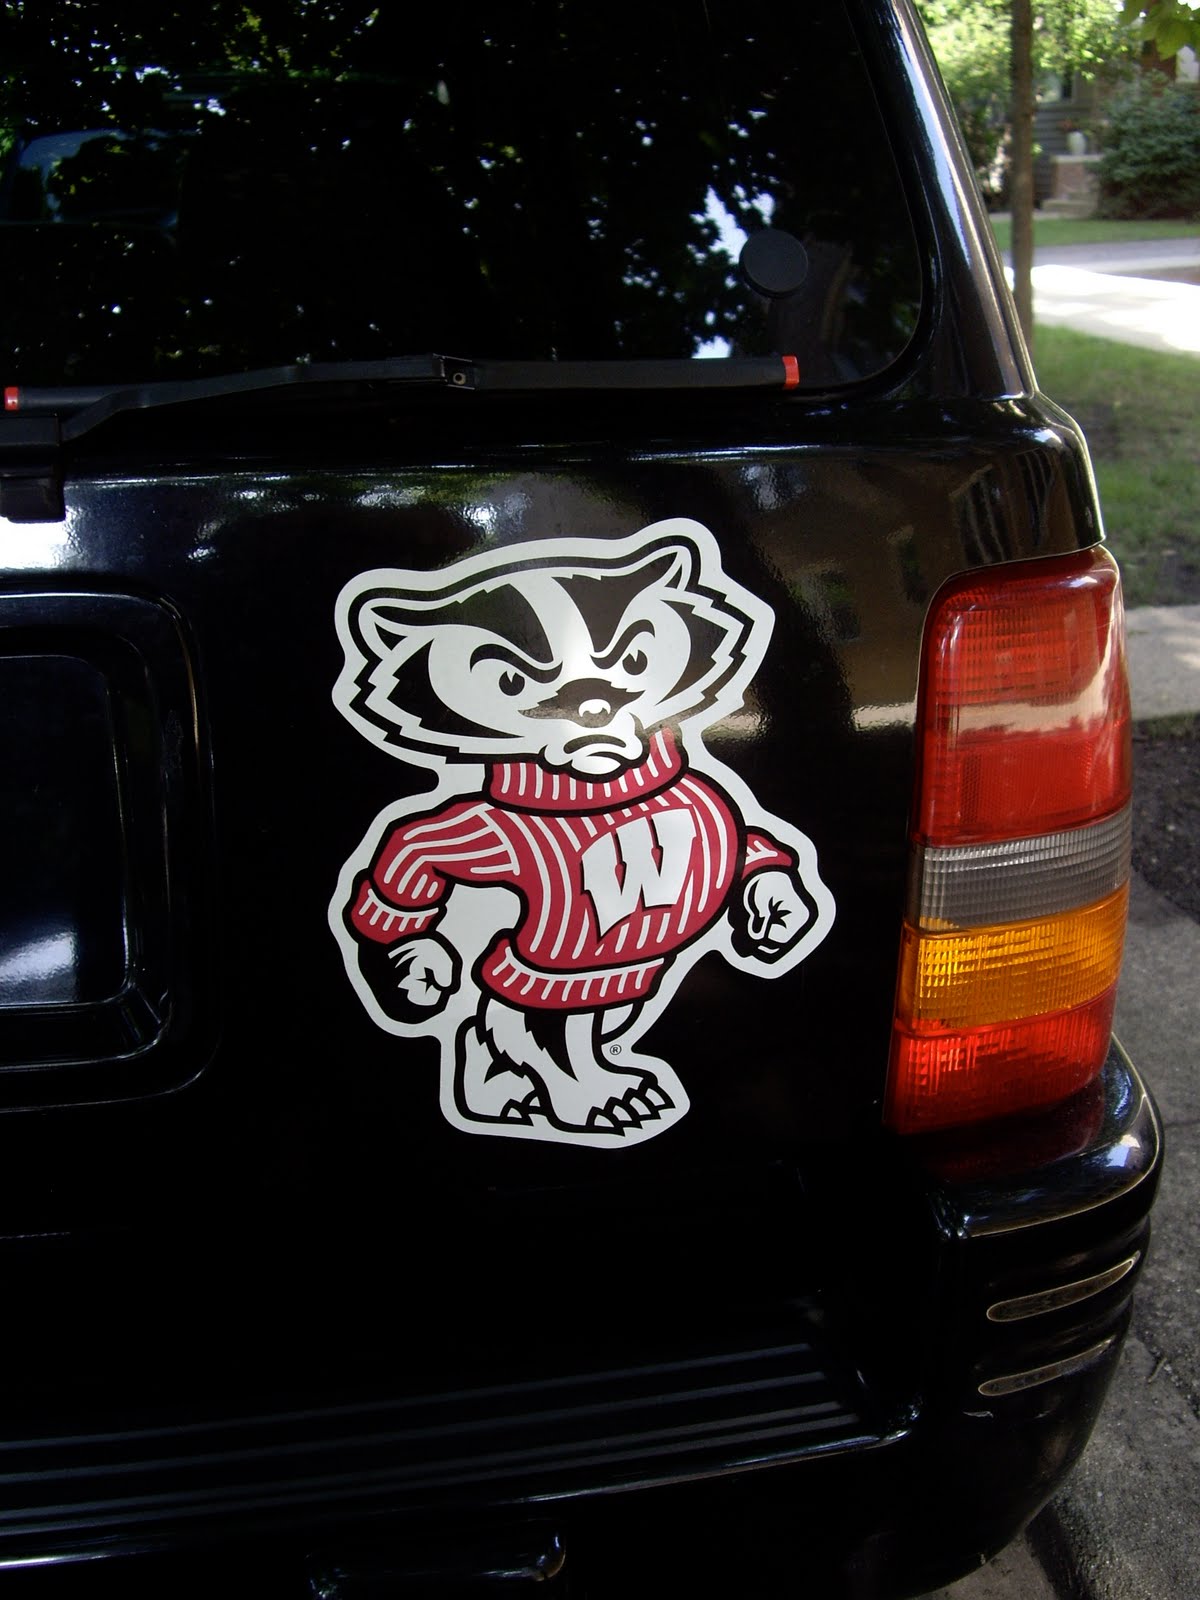 bucky badger wallpaper images of badger teemo skin league of